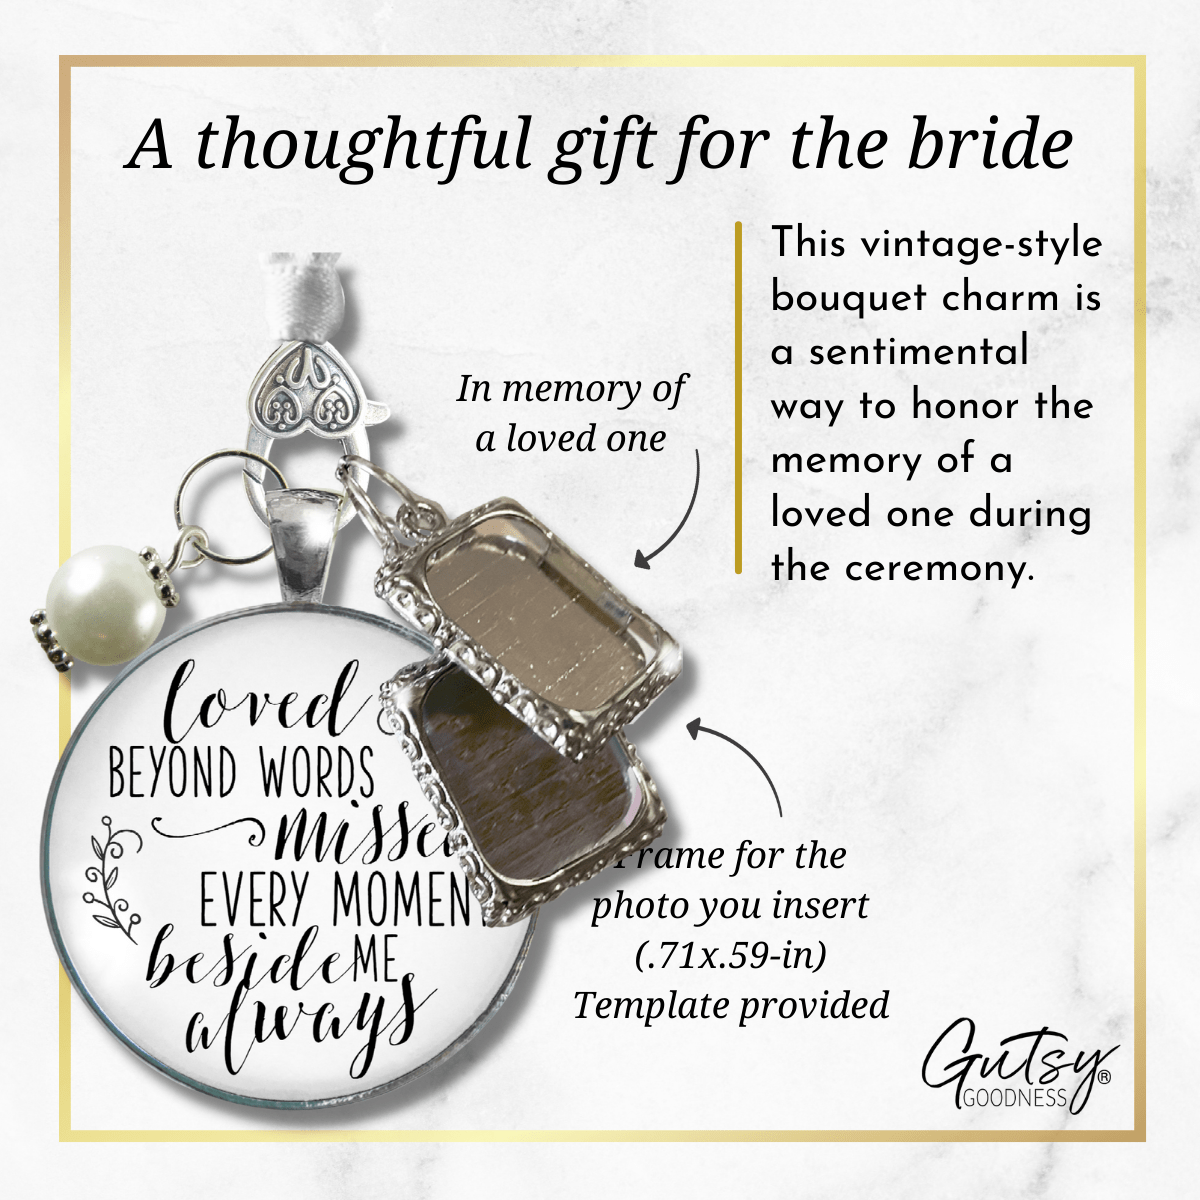 Bouquet Wedding Charm Loved Beyond Words Silver Bridal Memorial Photo Jewelry 2 Frames  Bouquet Charm - Gutsy Goodness Handmade Jewelry